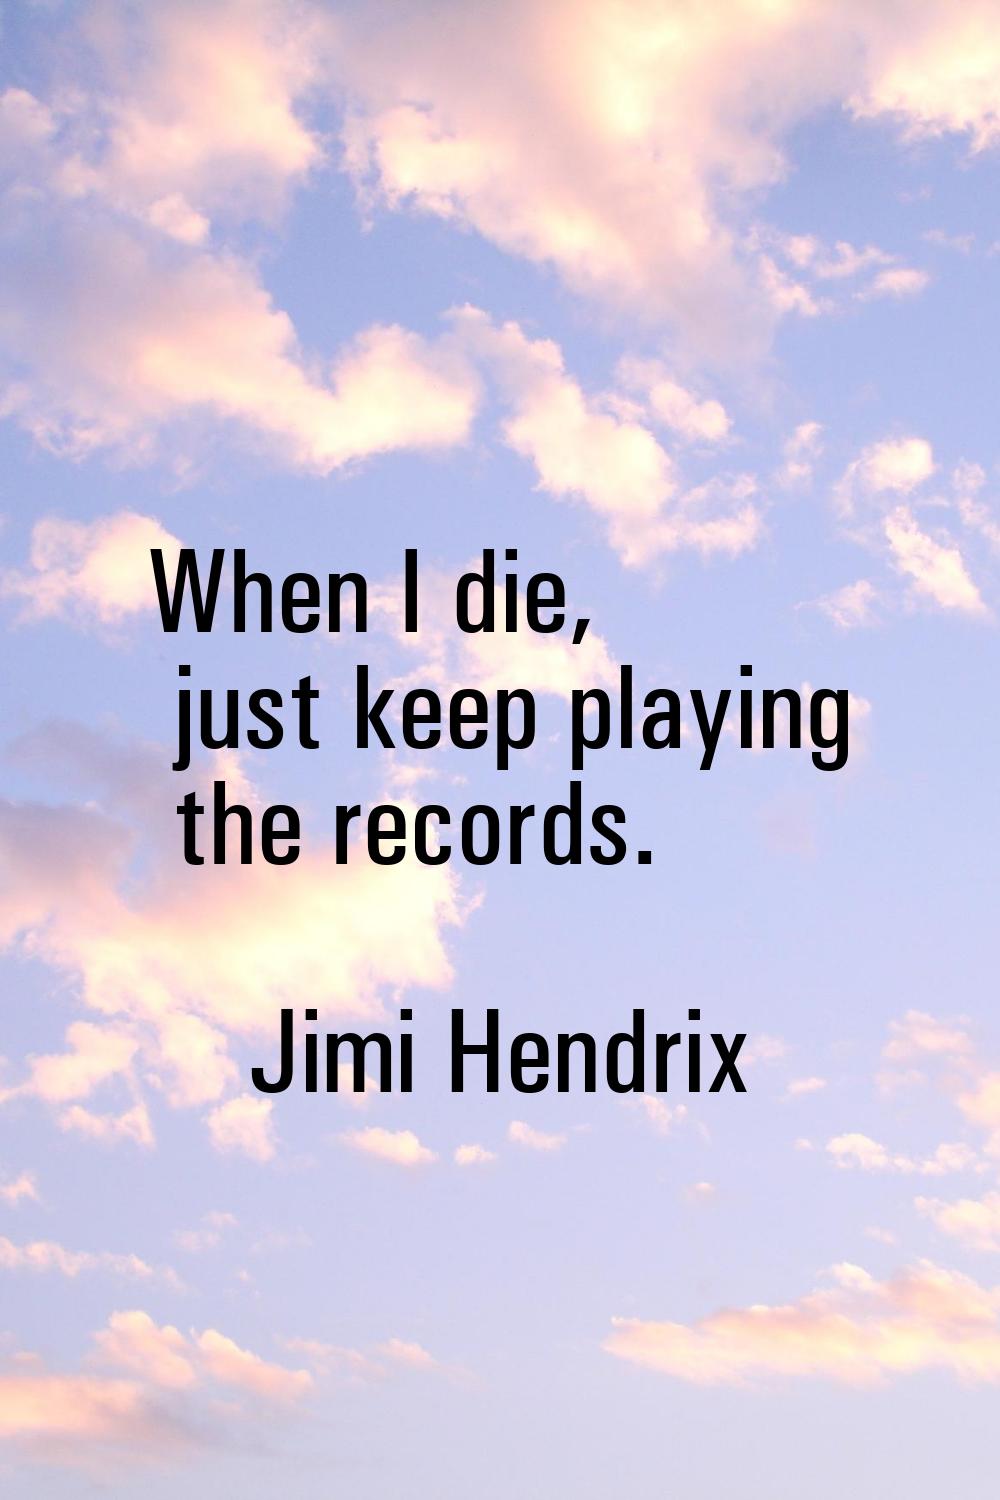 When I die, just keep playing the records.